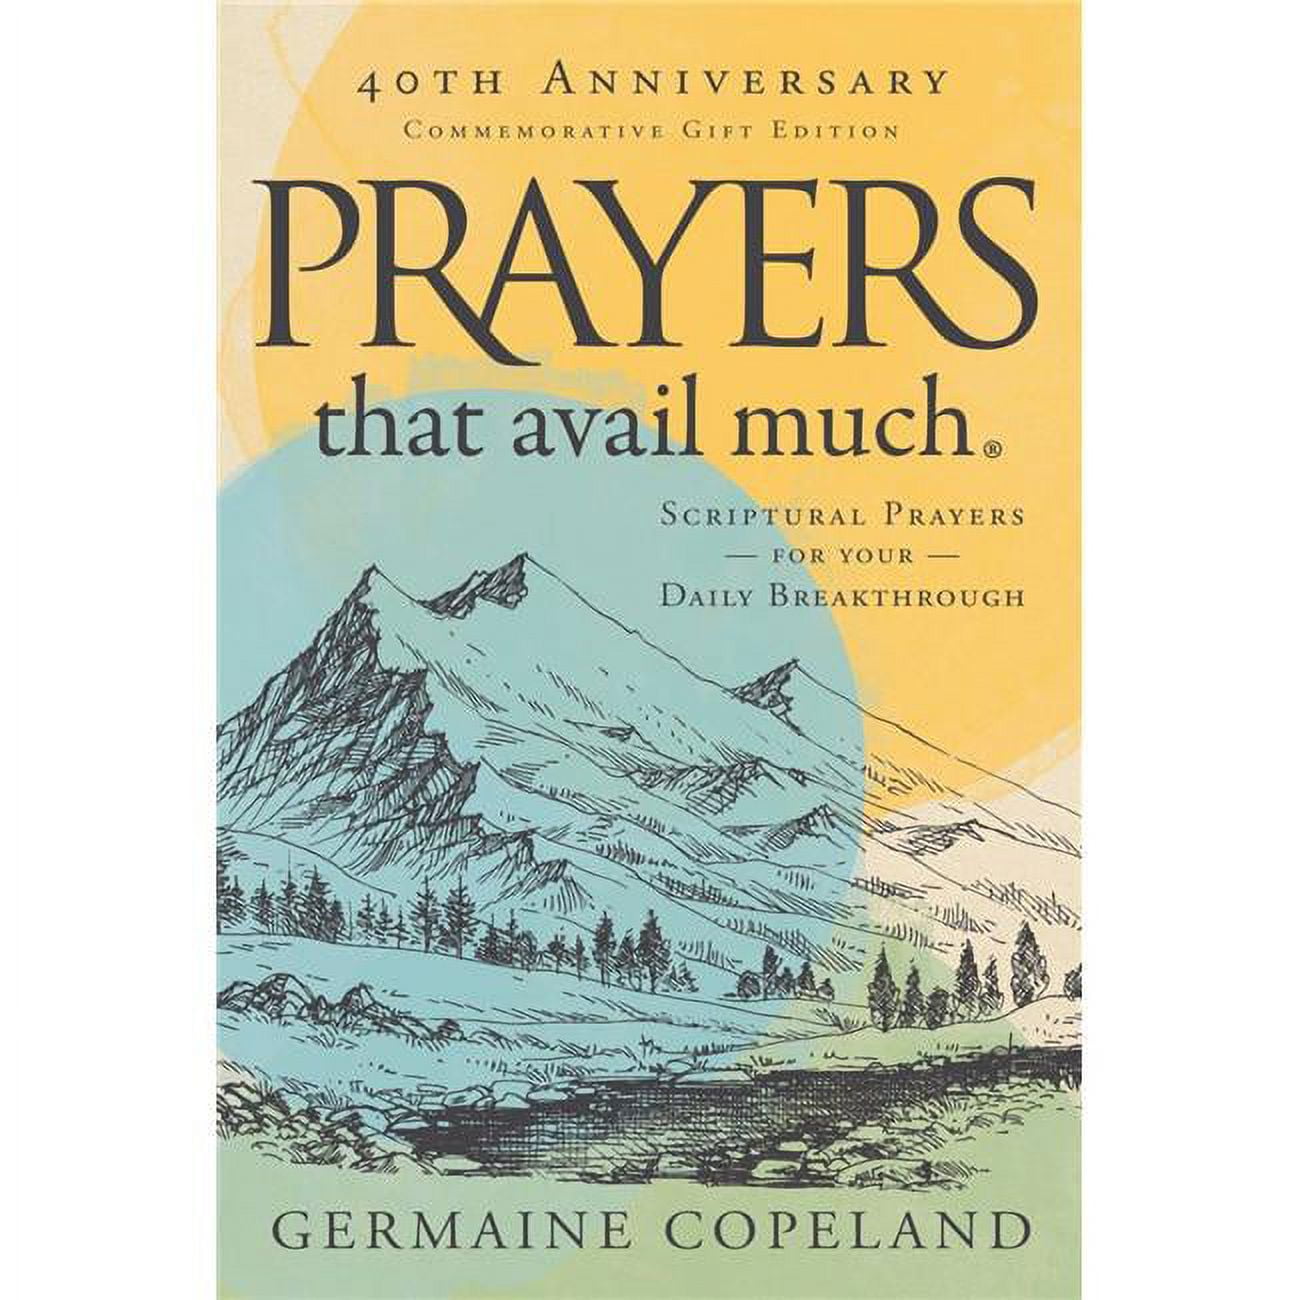 157388 Prayers That Avail Much 40th Anniversary Commemorative Gift Edition